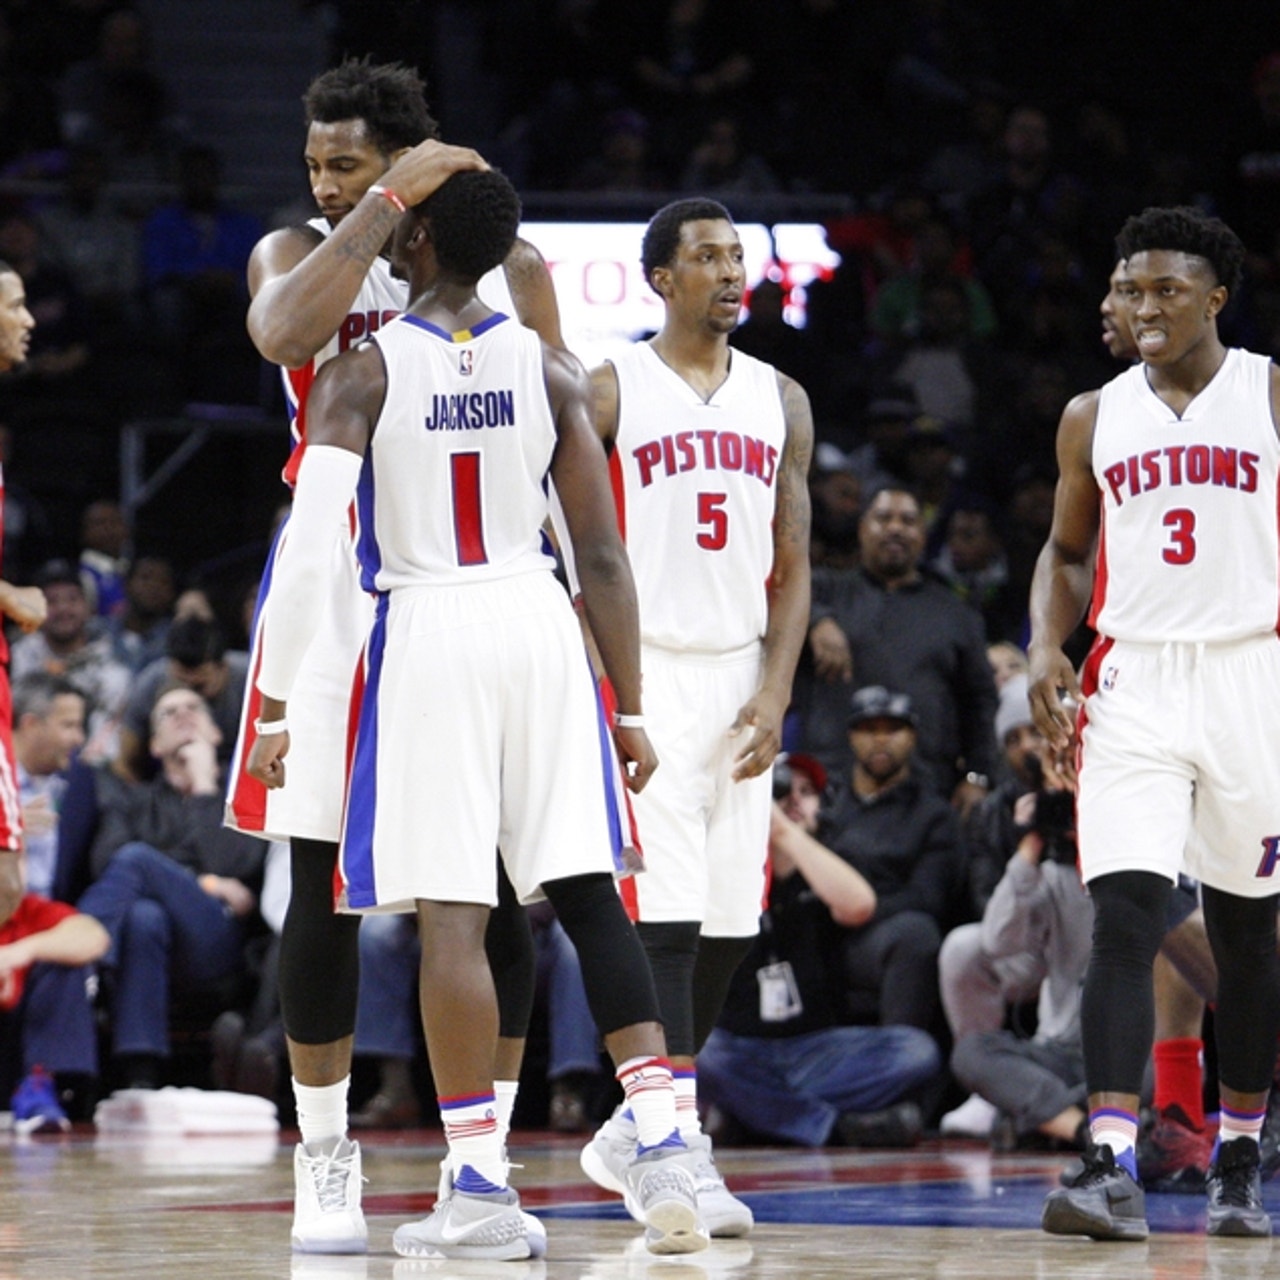 Pistons vs. Hawks preview: It's time to feel the teal - Detroit Bad Boys